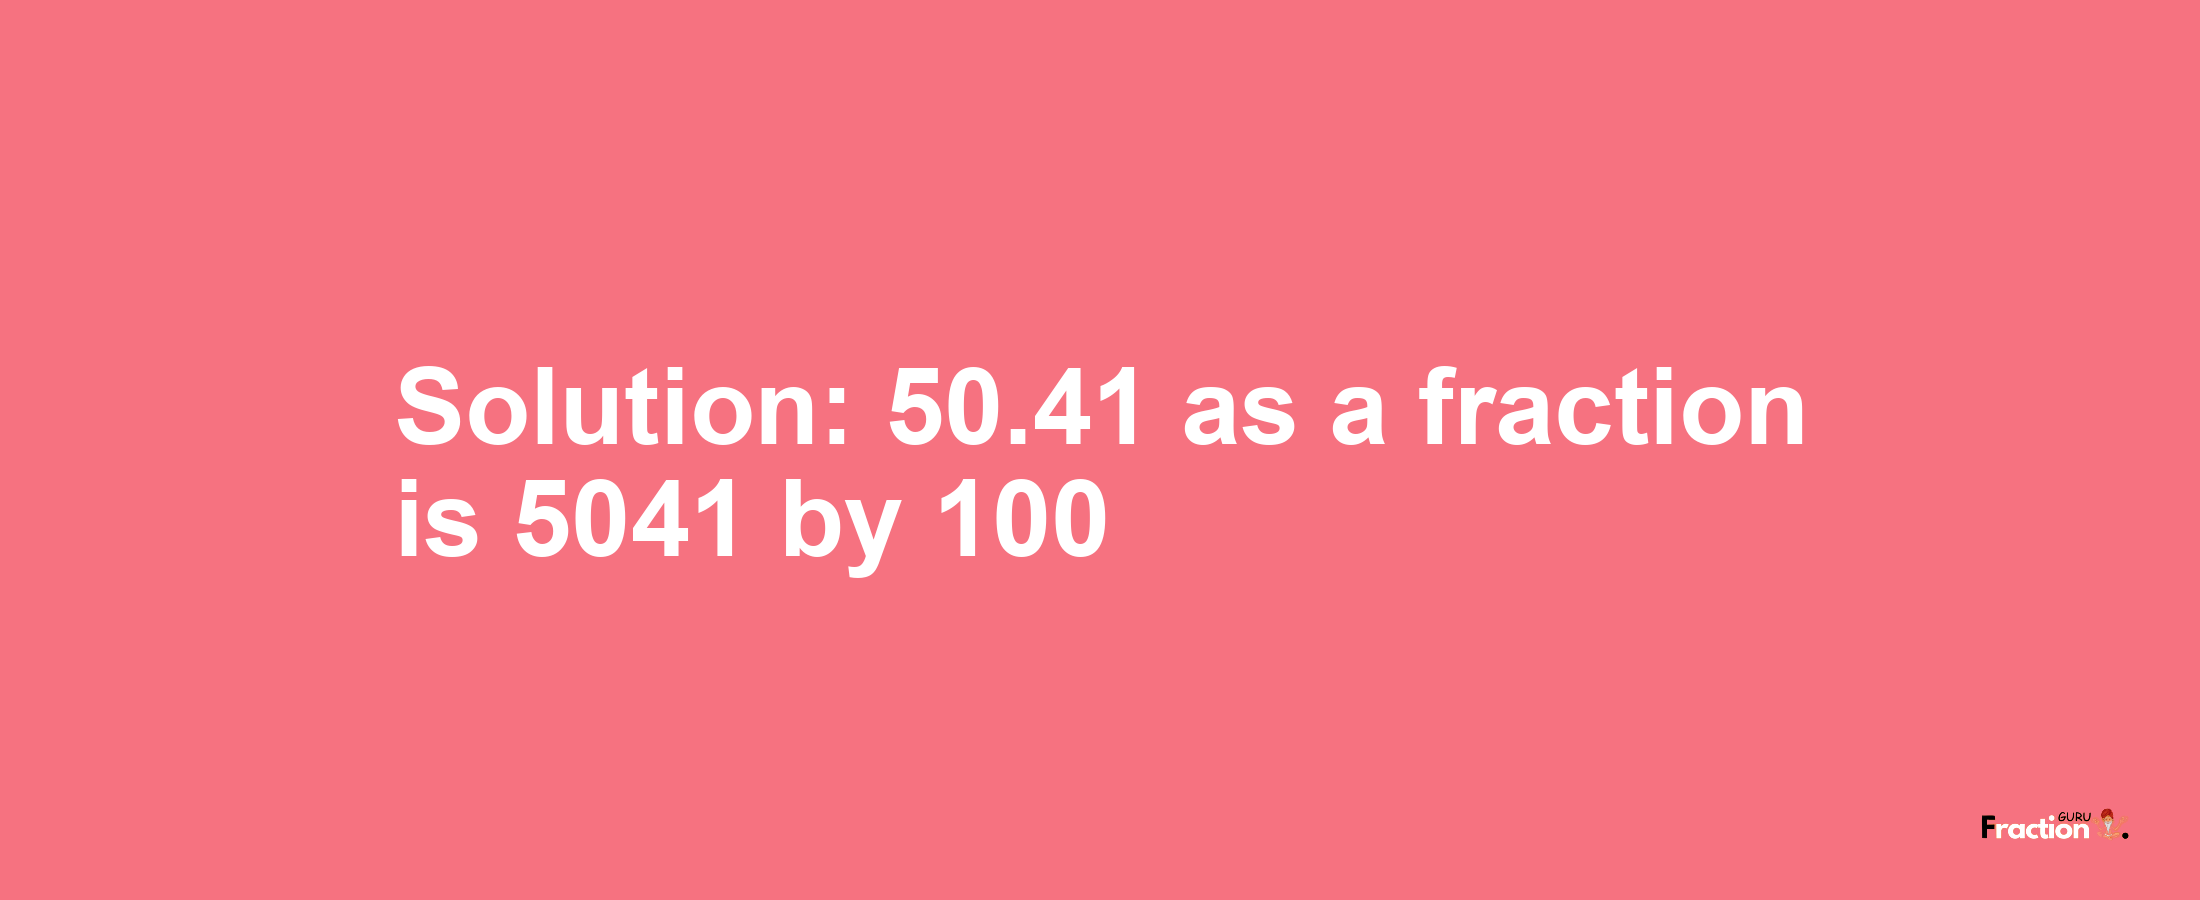 Solution:50.41 as a fraction is 5041/100